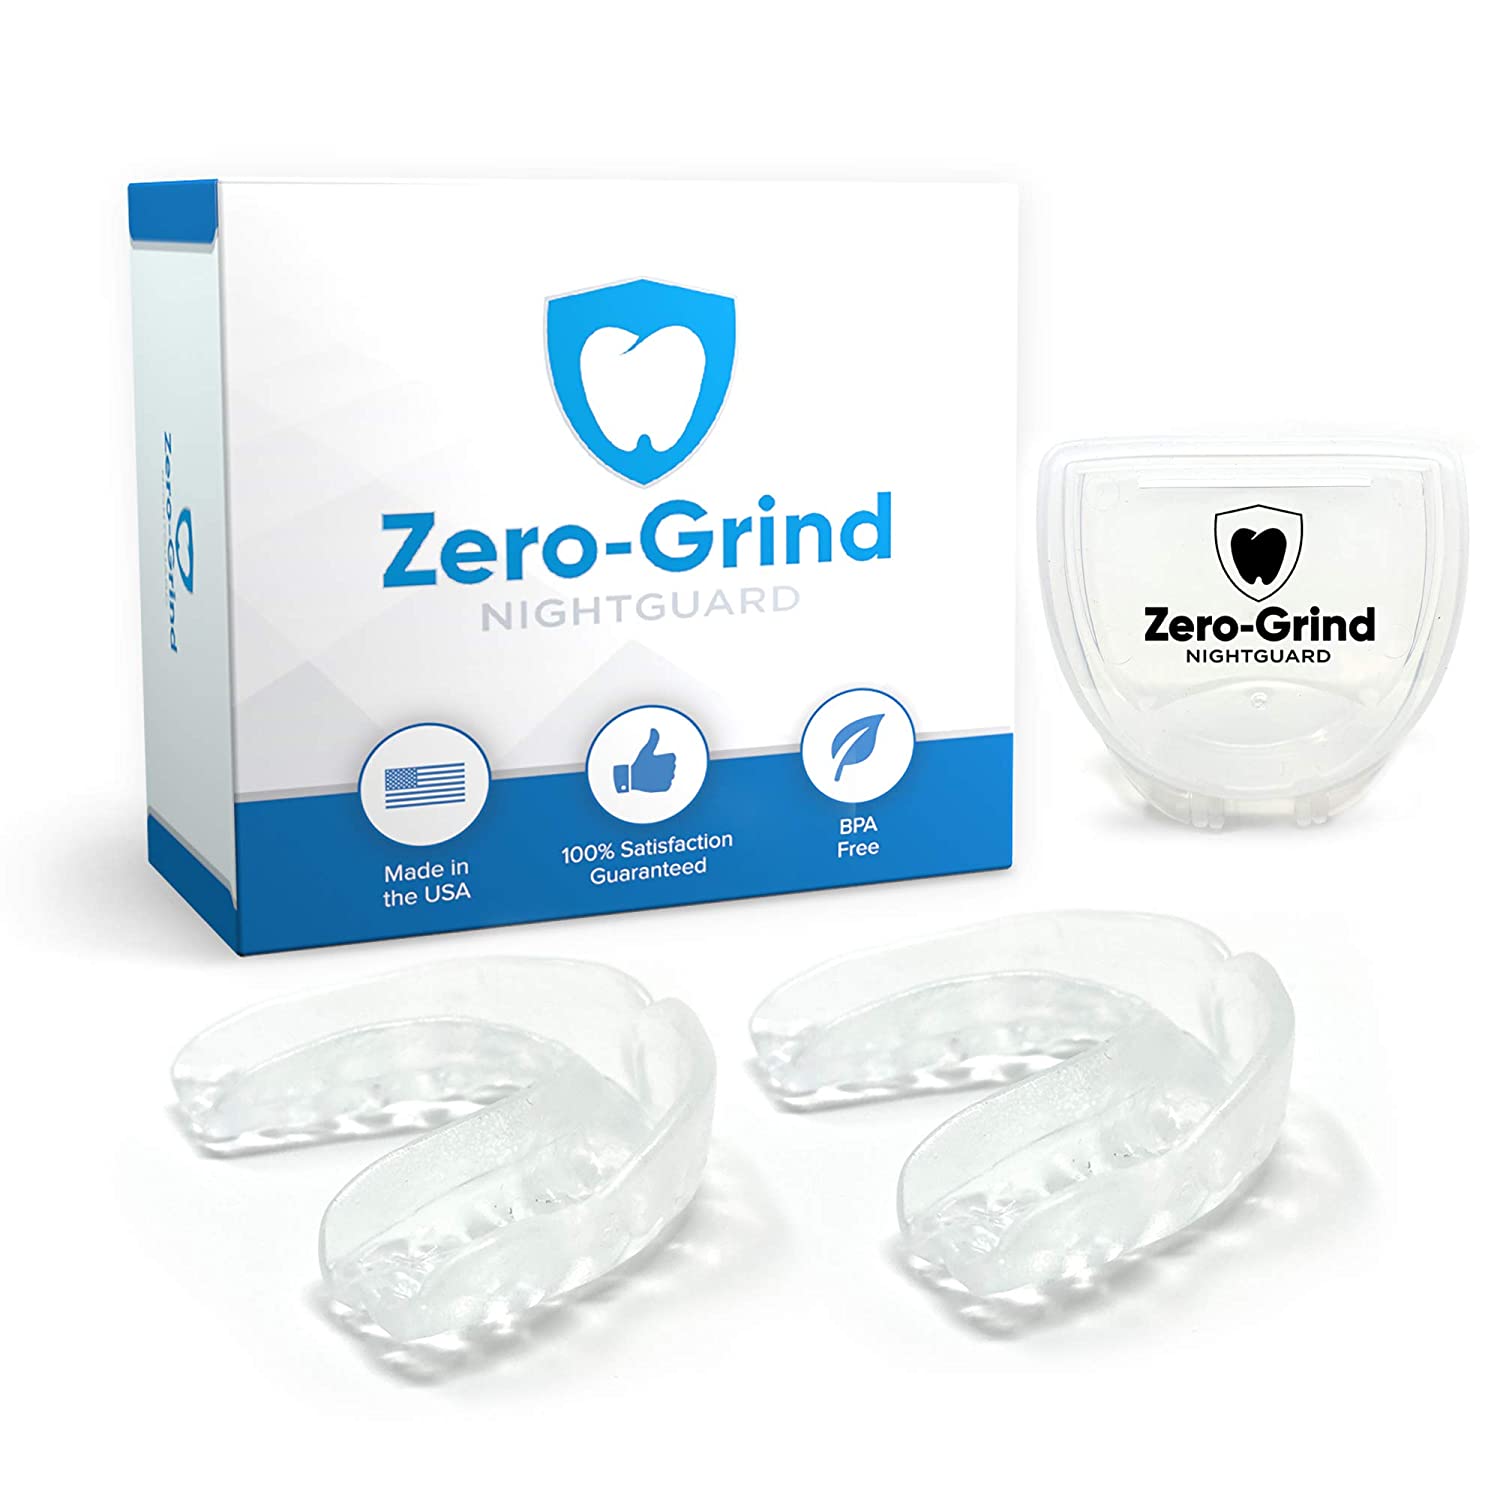 Zero-Grind Hydrophobic Fitting Material Night Guard For Teeth Grinding